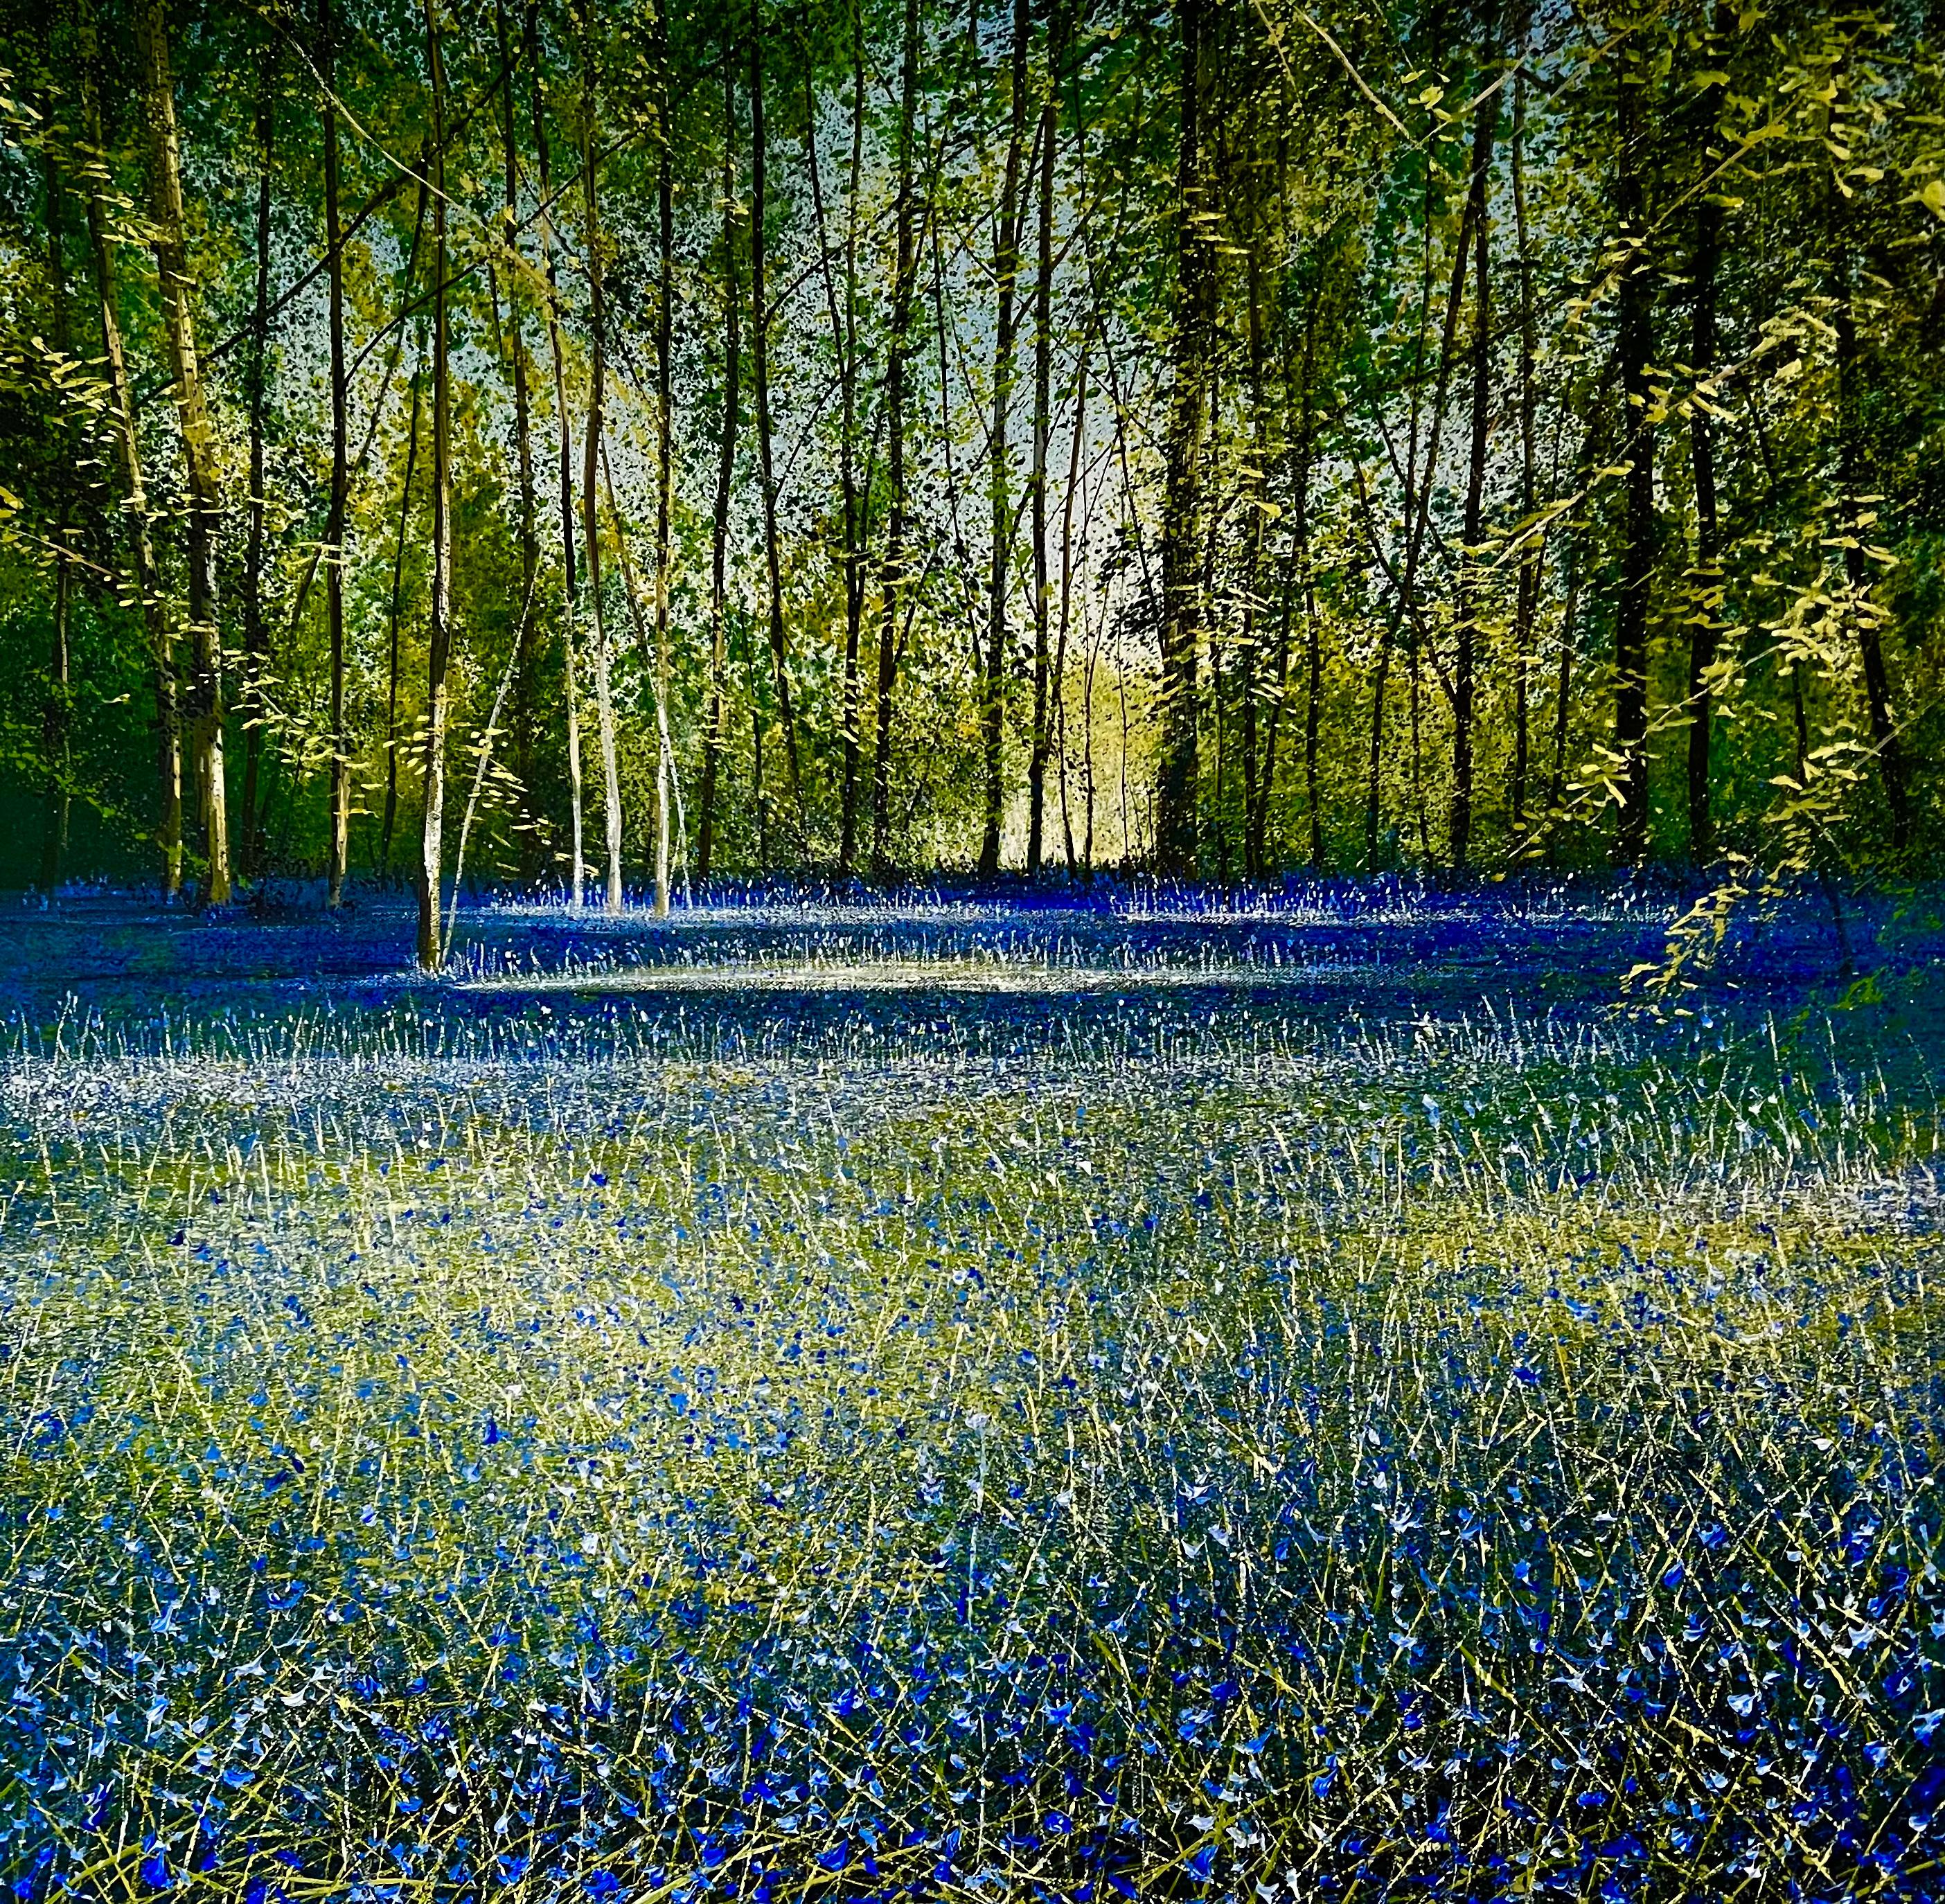 Rory J. Browne Landscape Painting - Bluebell Woods - landscape painting, original floral woodland realism